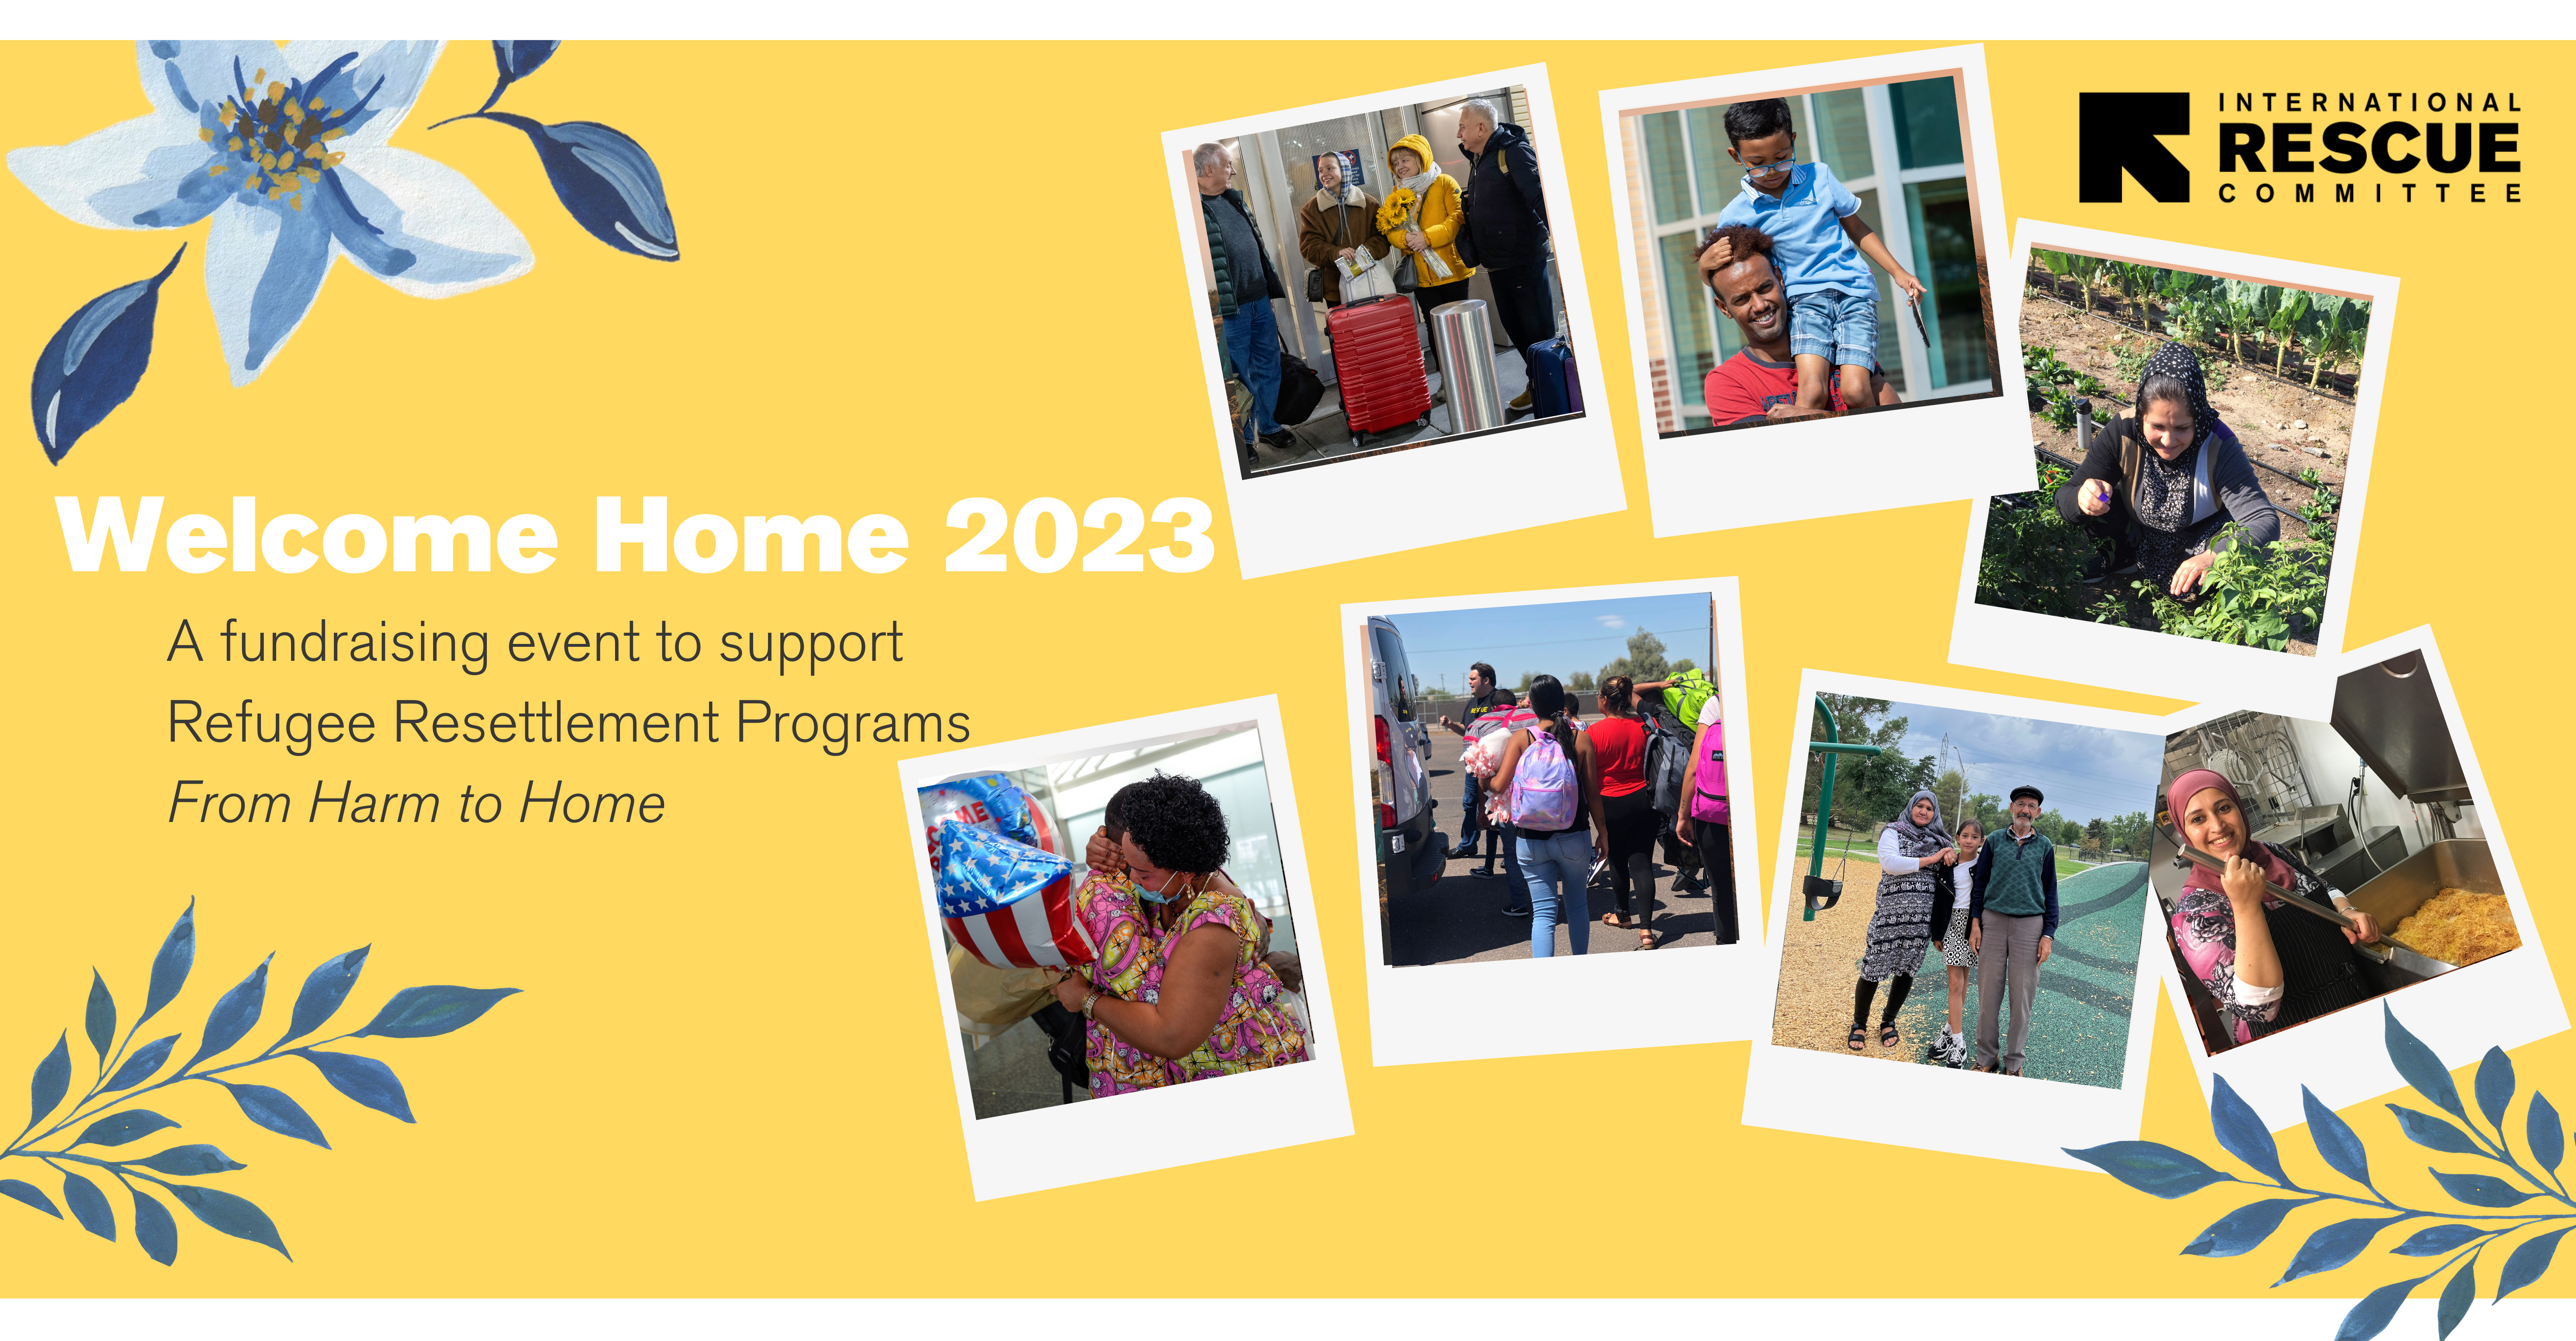 Welcome Home Fundraising Event 2023